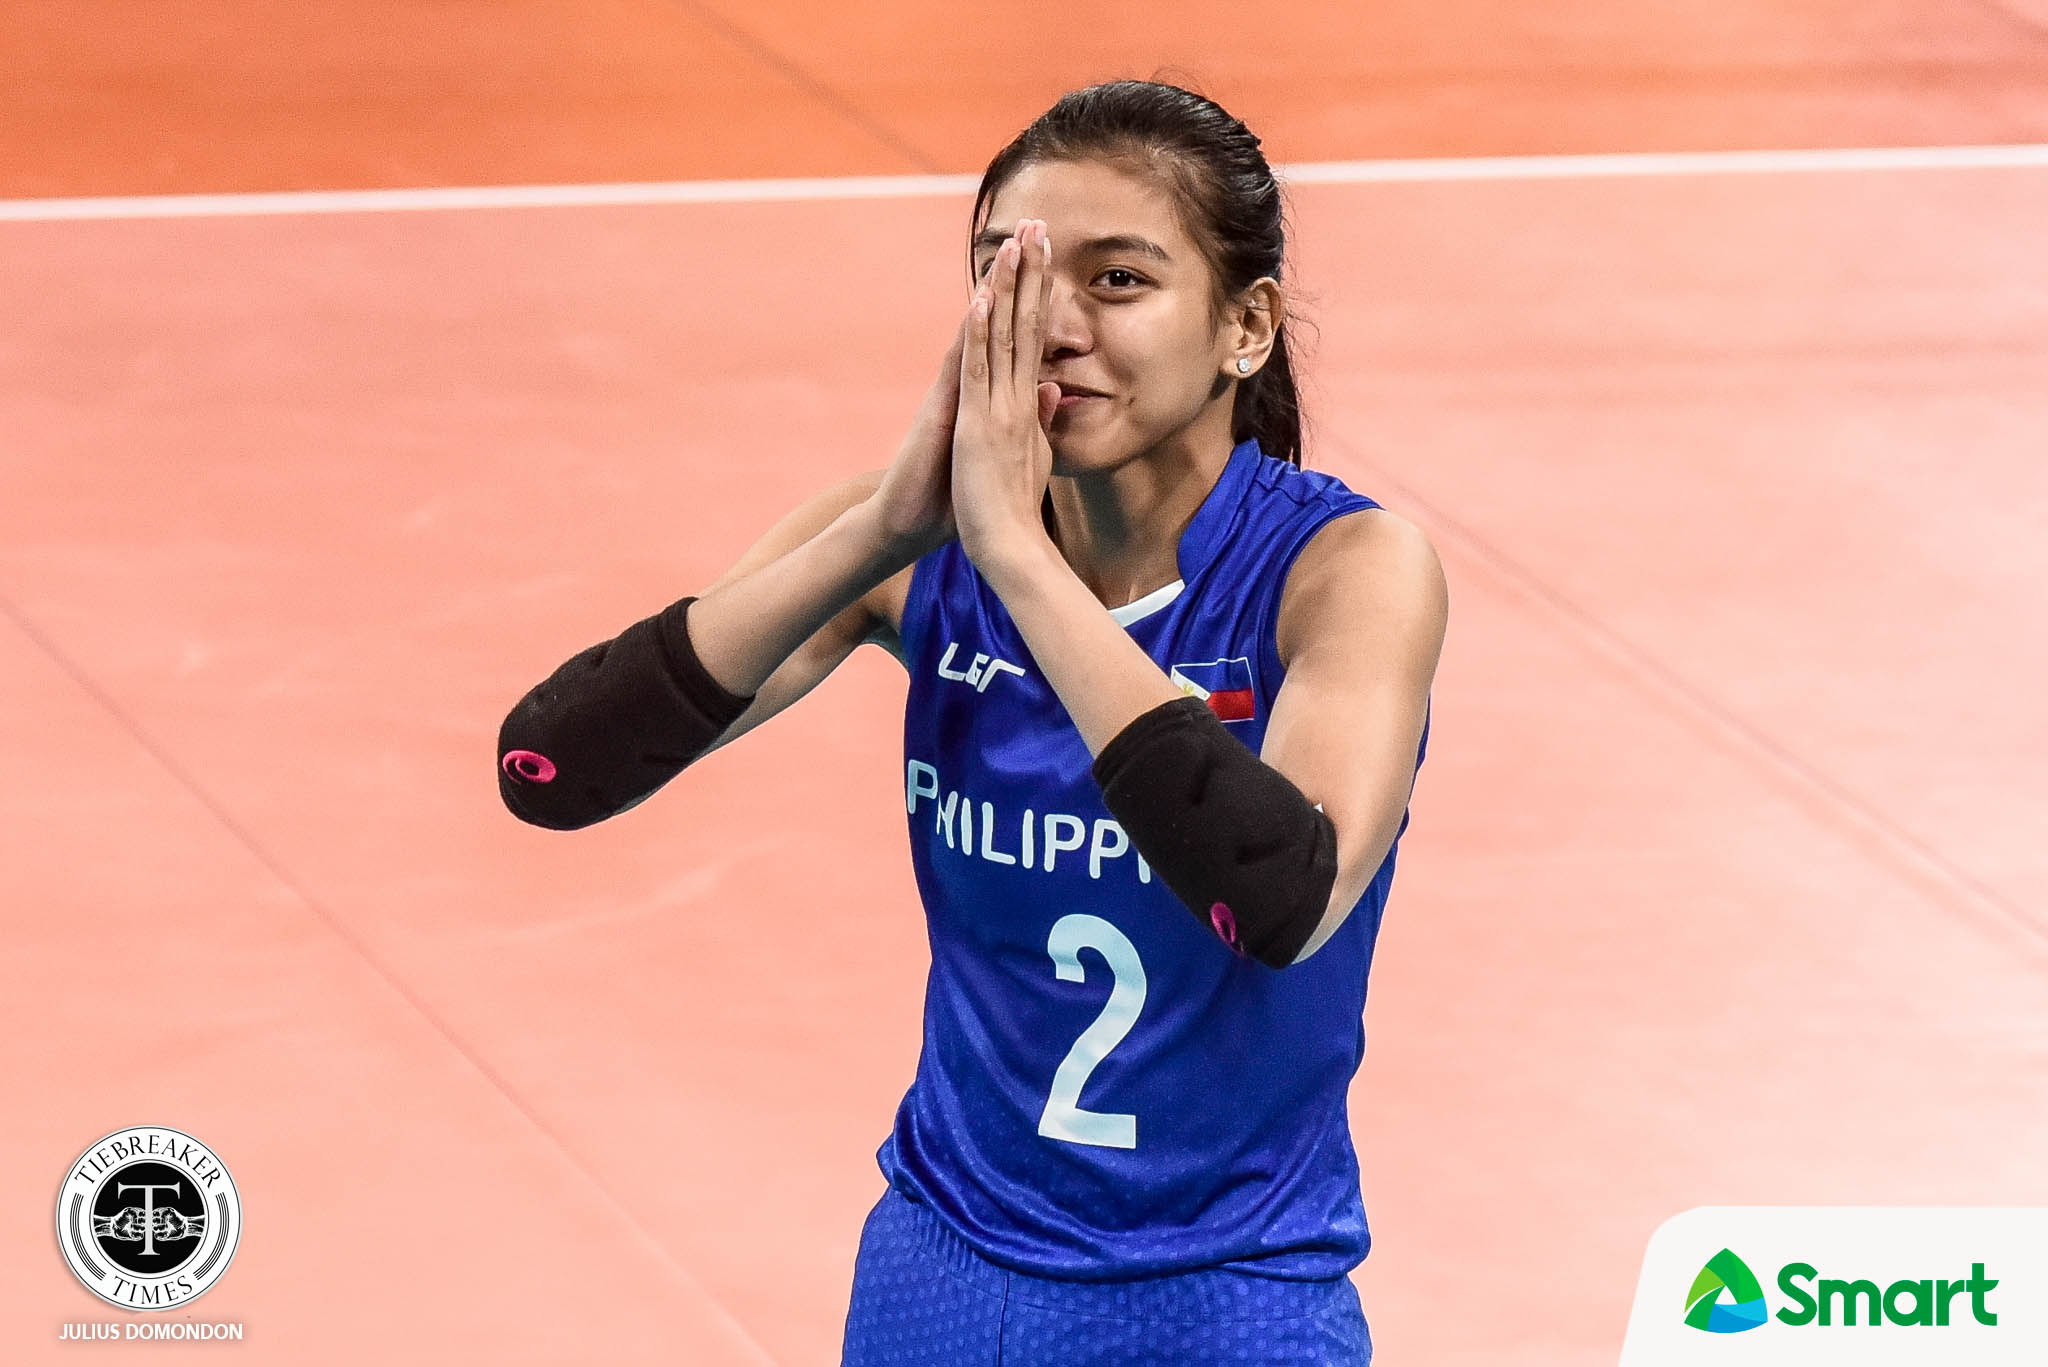 2019-sea-games-volleyball-indonesia-def-philippines-alyssa-valdez Alyssa Valdez harbors no ill feelings for late-game benching 2019 SEA Games News Volleyball  - philippine sports news